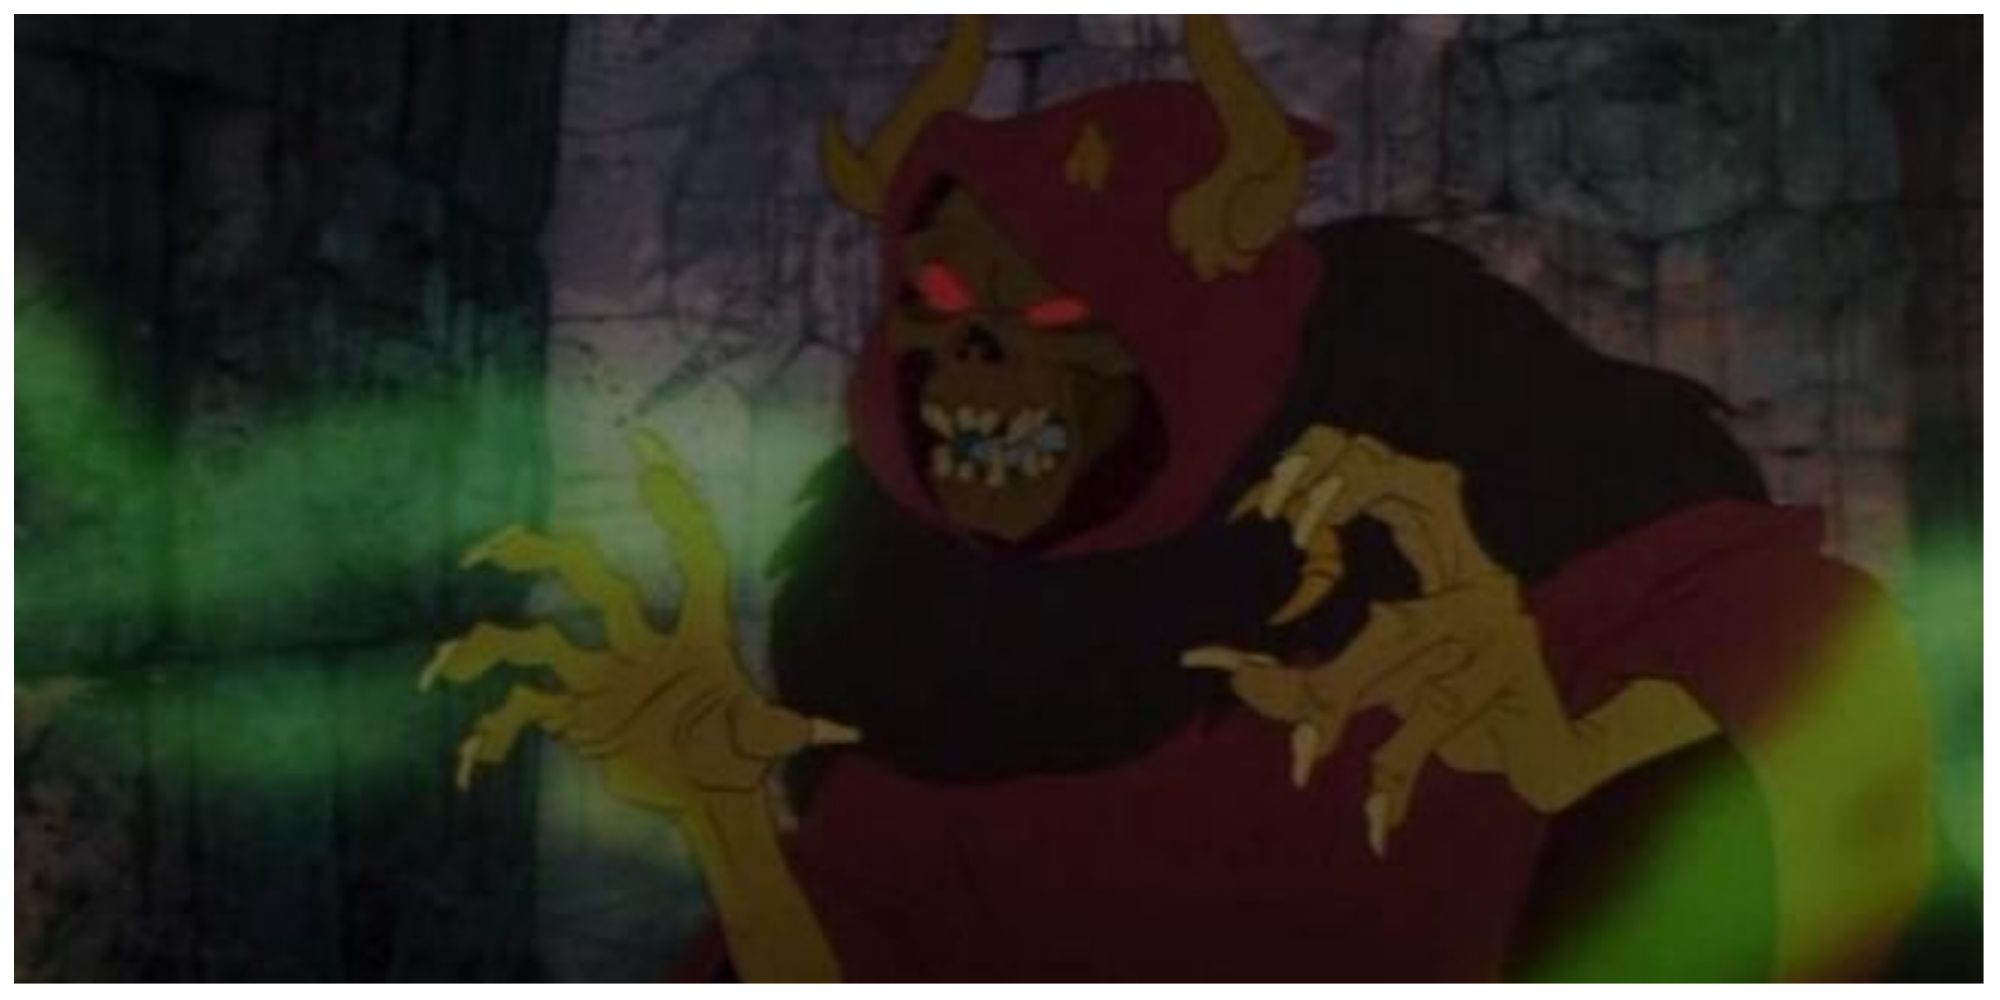 The Horned King in the Black Cauldron